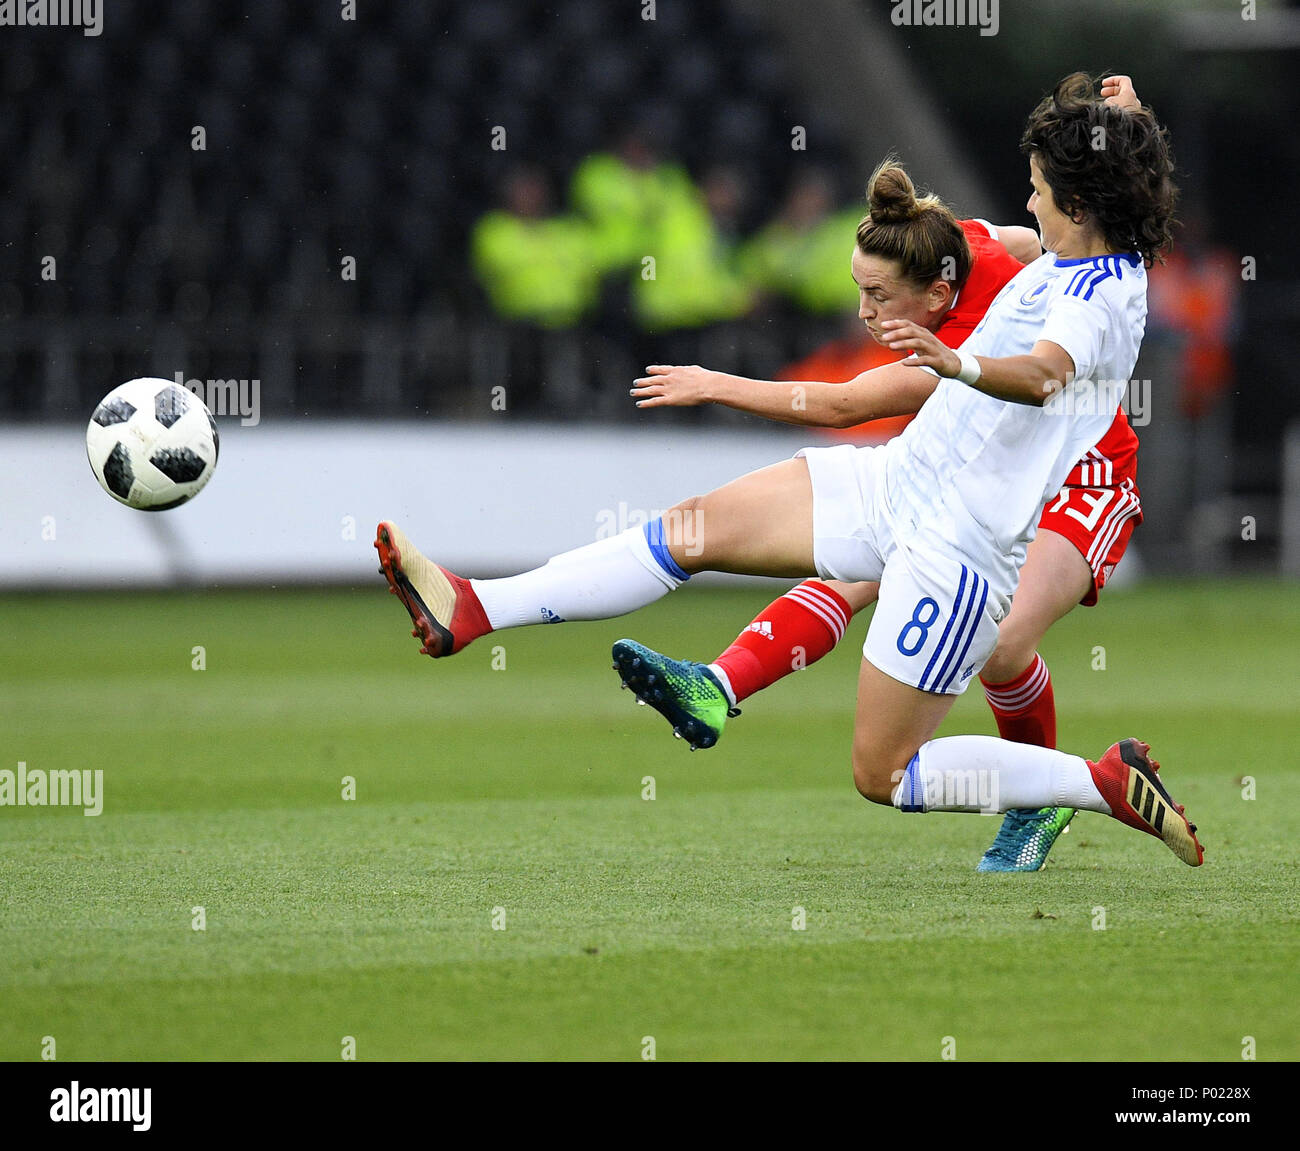 Wales v Bosnia in action during the Women's World Cup Qualifiers at Liberty Stadium Swansea Swansea Wales on June 07 2018 Graham / GlennSports Stock Photo